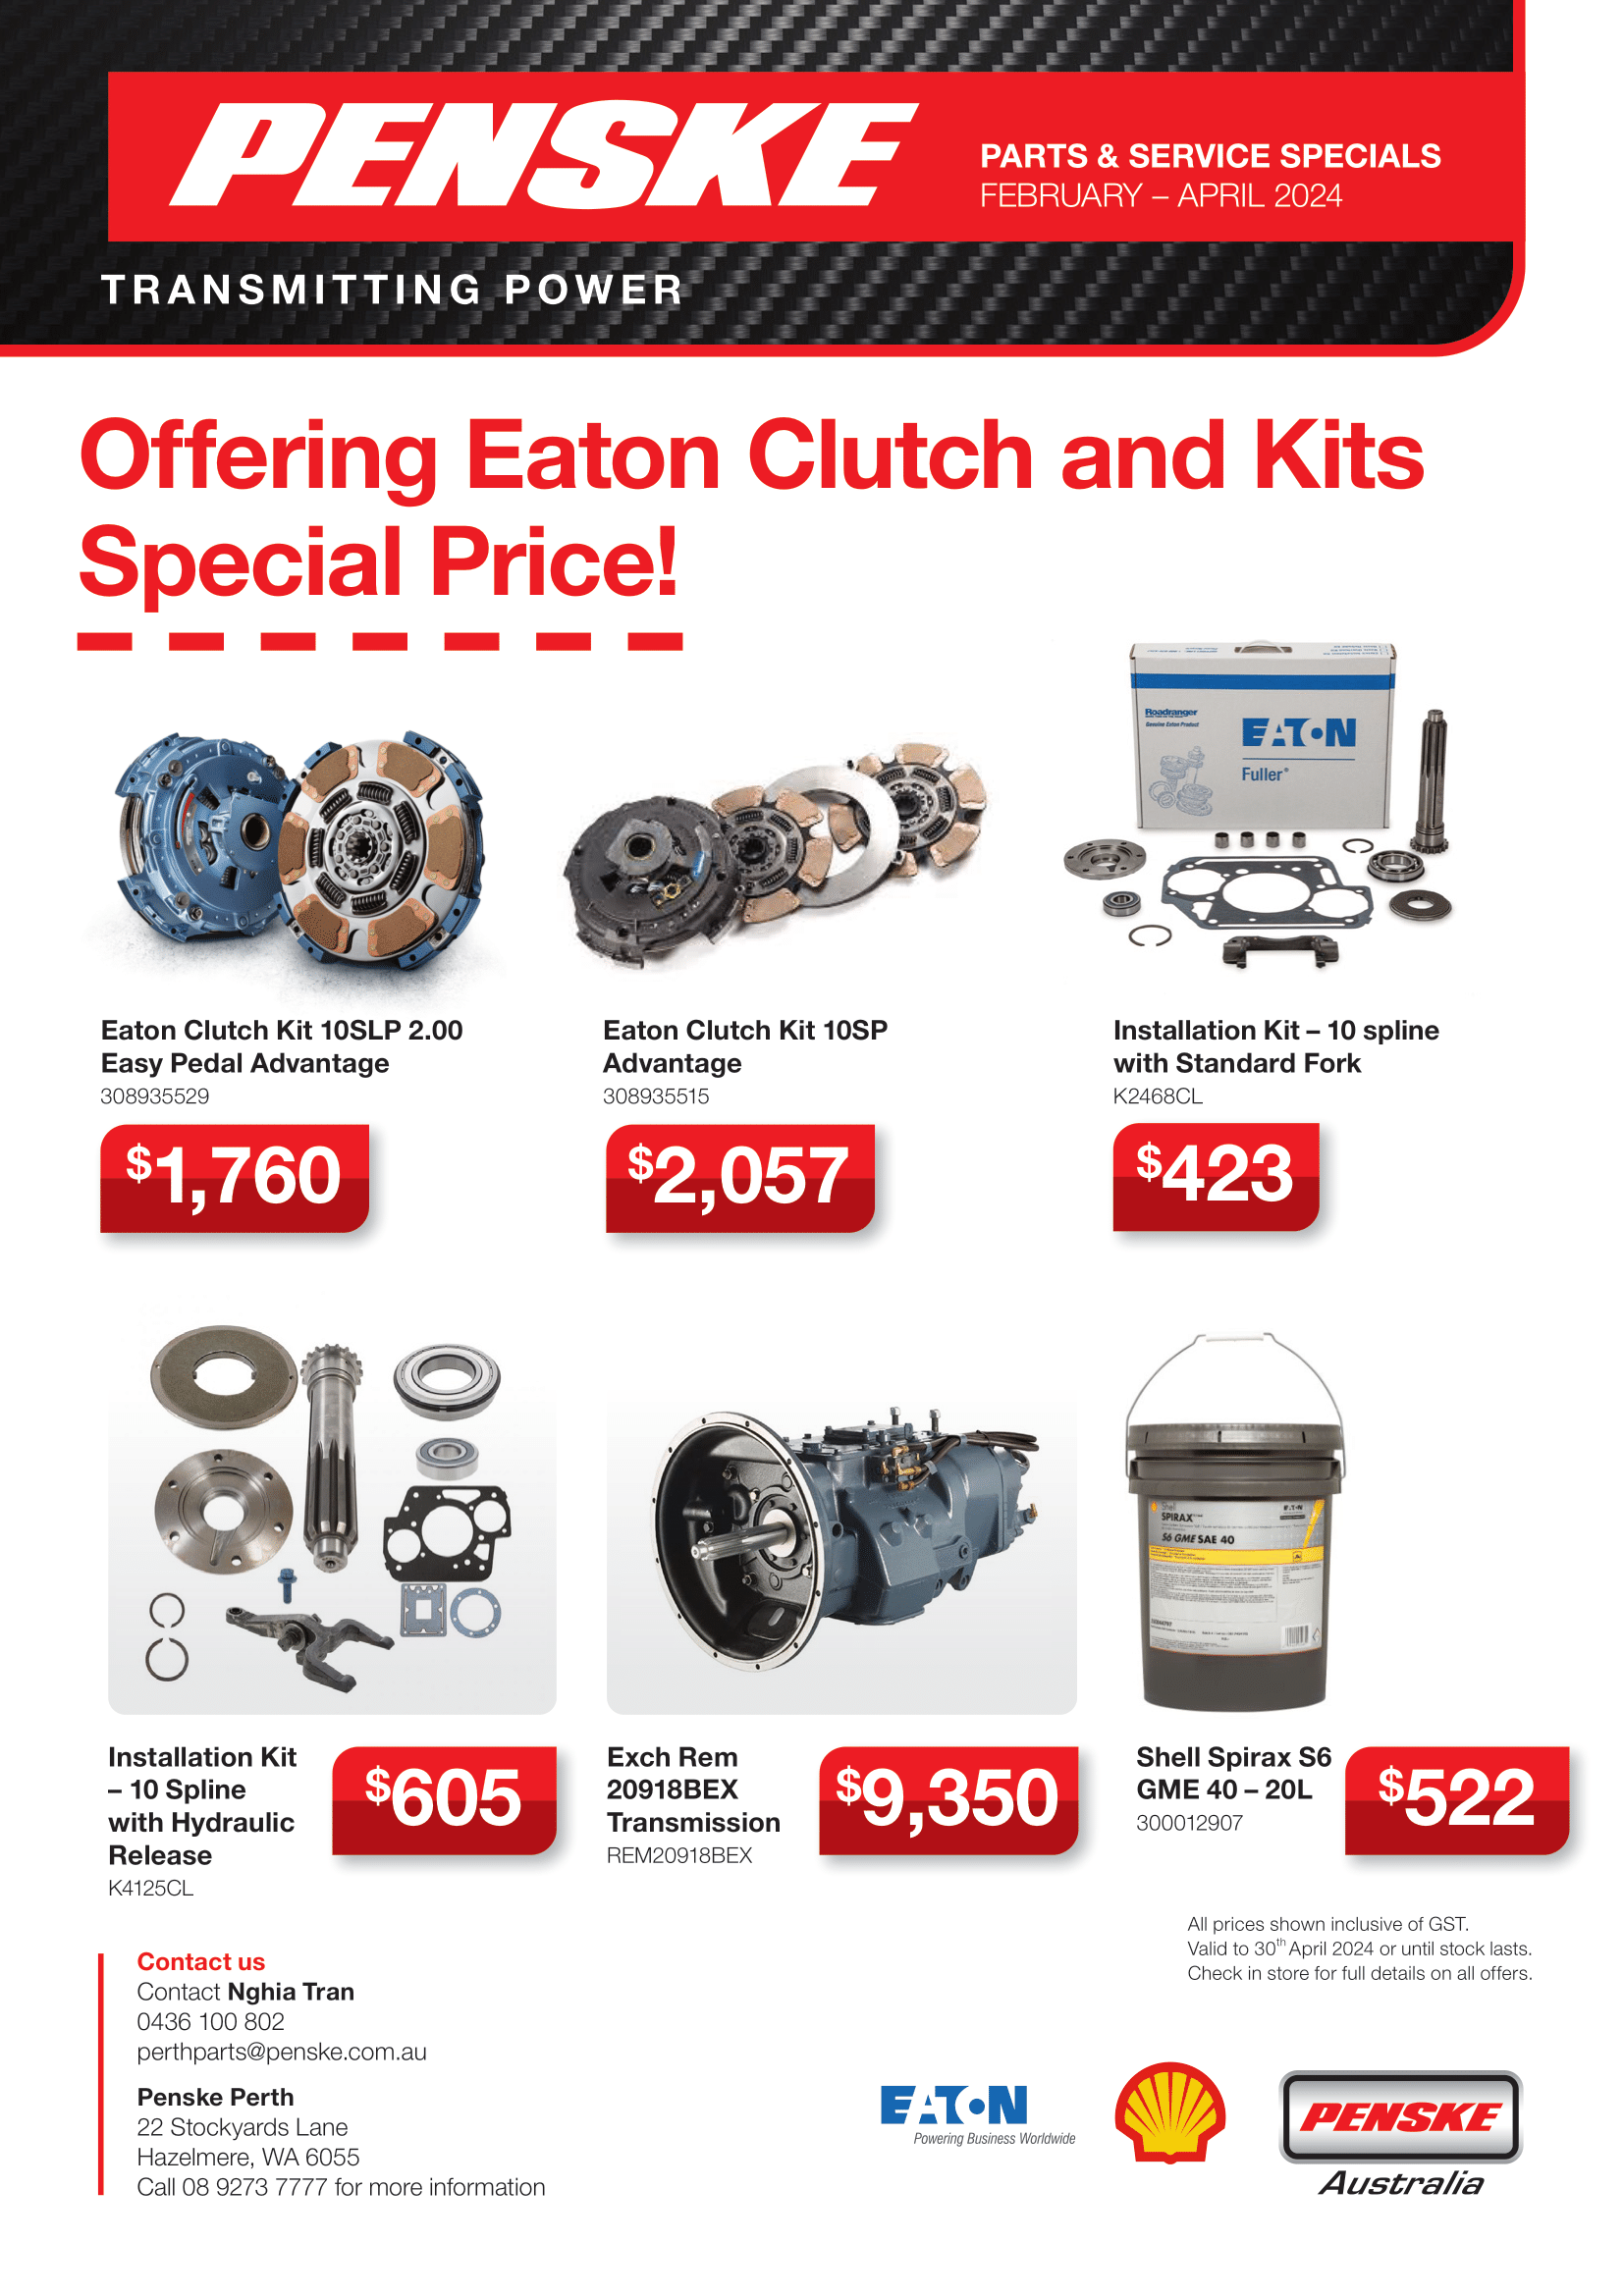 Eaton Clutch and Kits Promotion